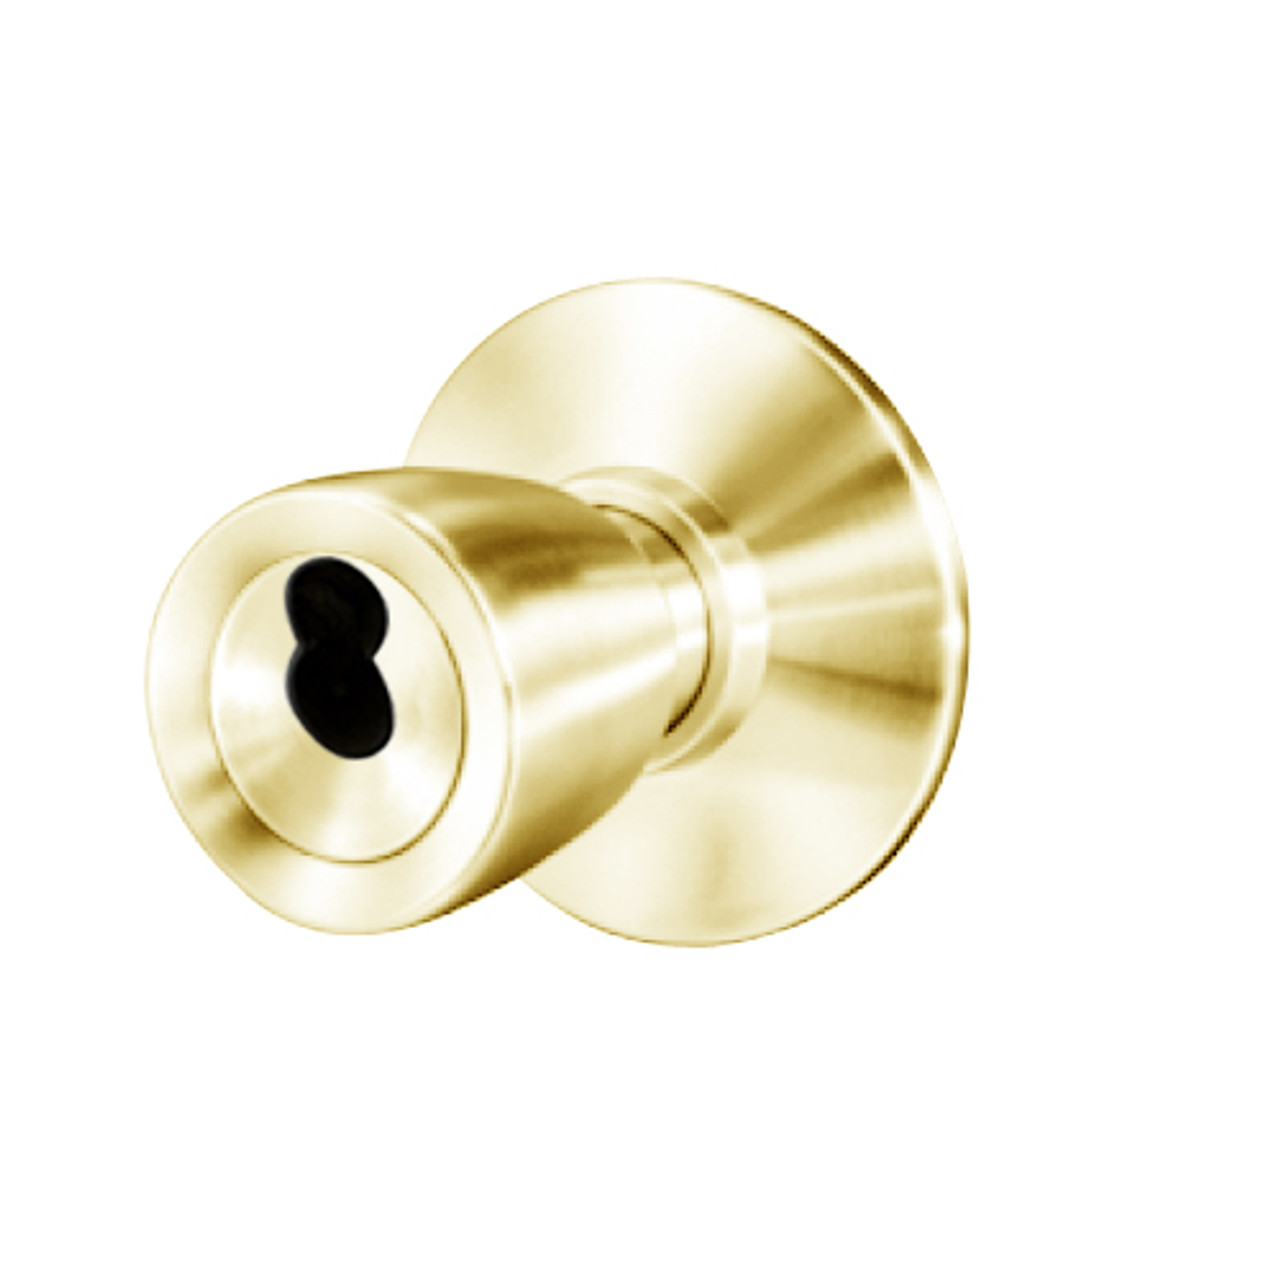 8K37D6DS3605 Best 8K Series Storeroom Heavy Duty Cylindrical Knob Locks with Tulip Style in Bright Brass